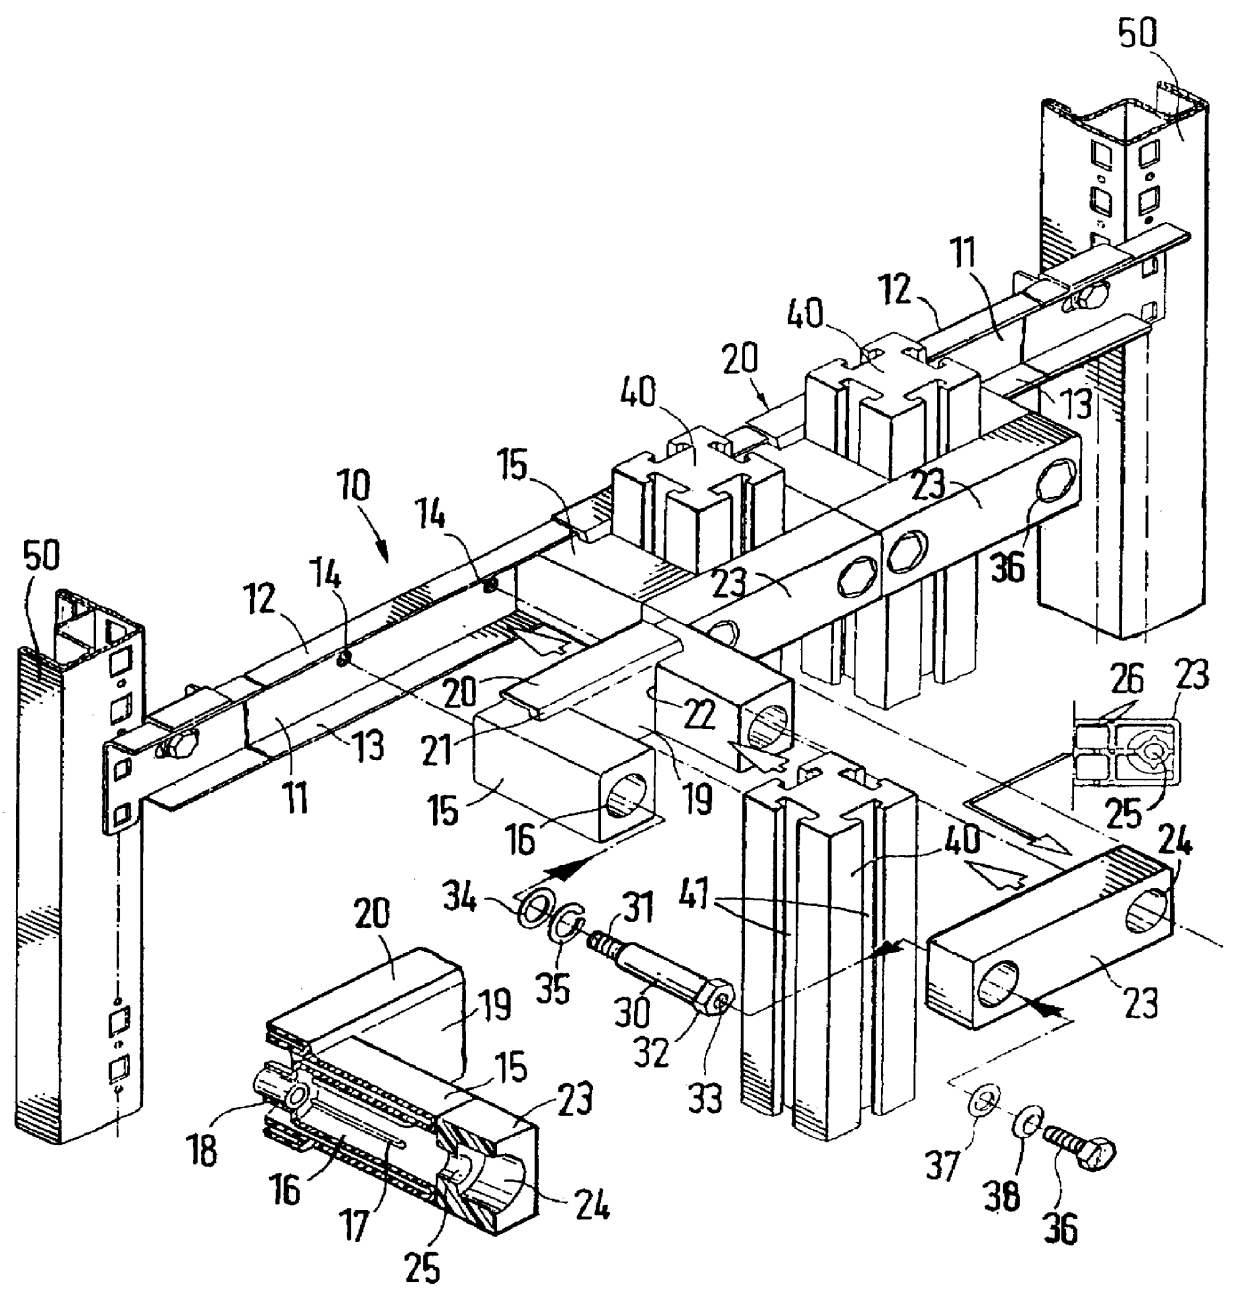 Device for attaching busbar to a support rail